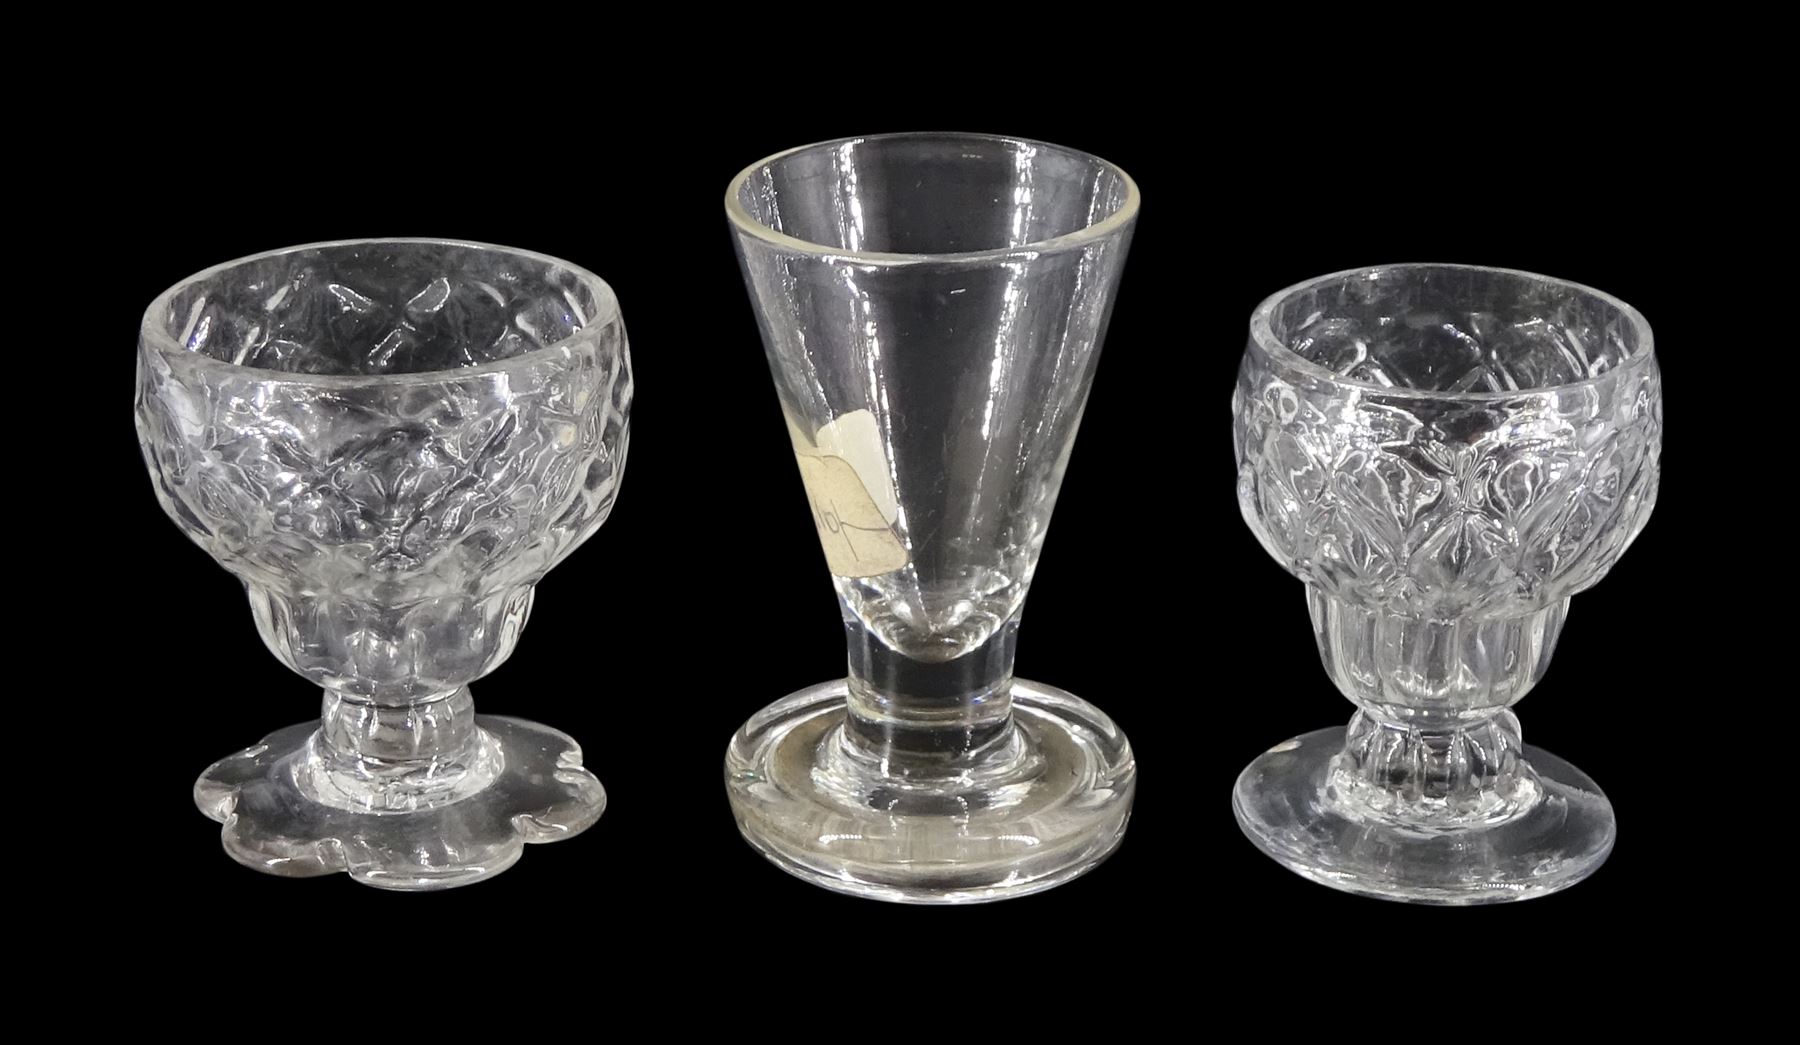 Two 18th century Bonnet or Monteith glasses, with honeycomb moulded bowls, one example with petal ed